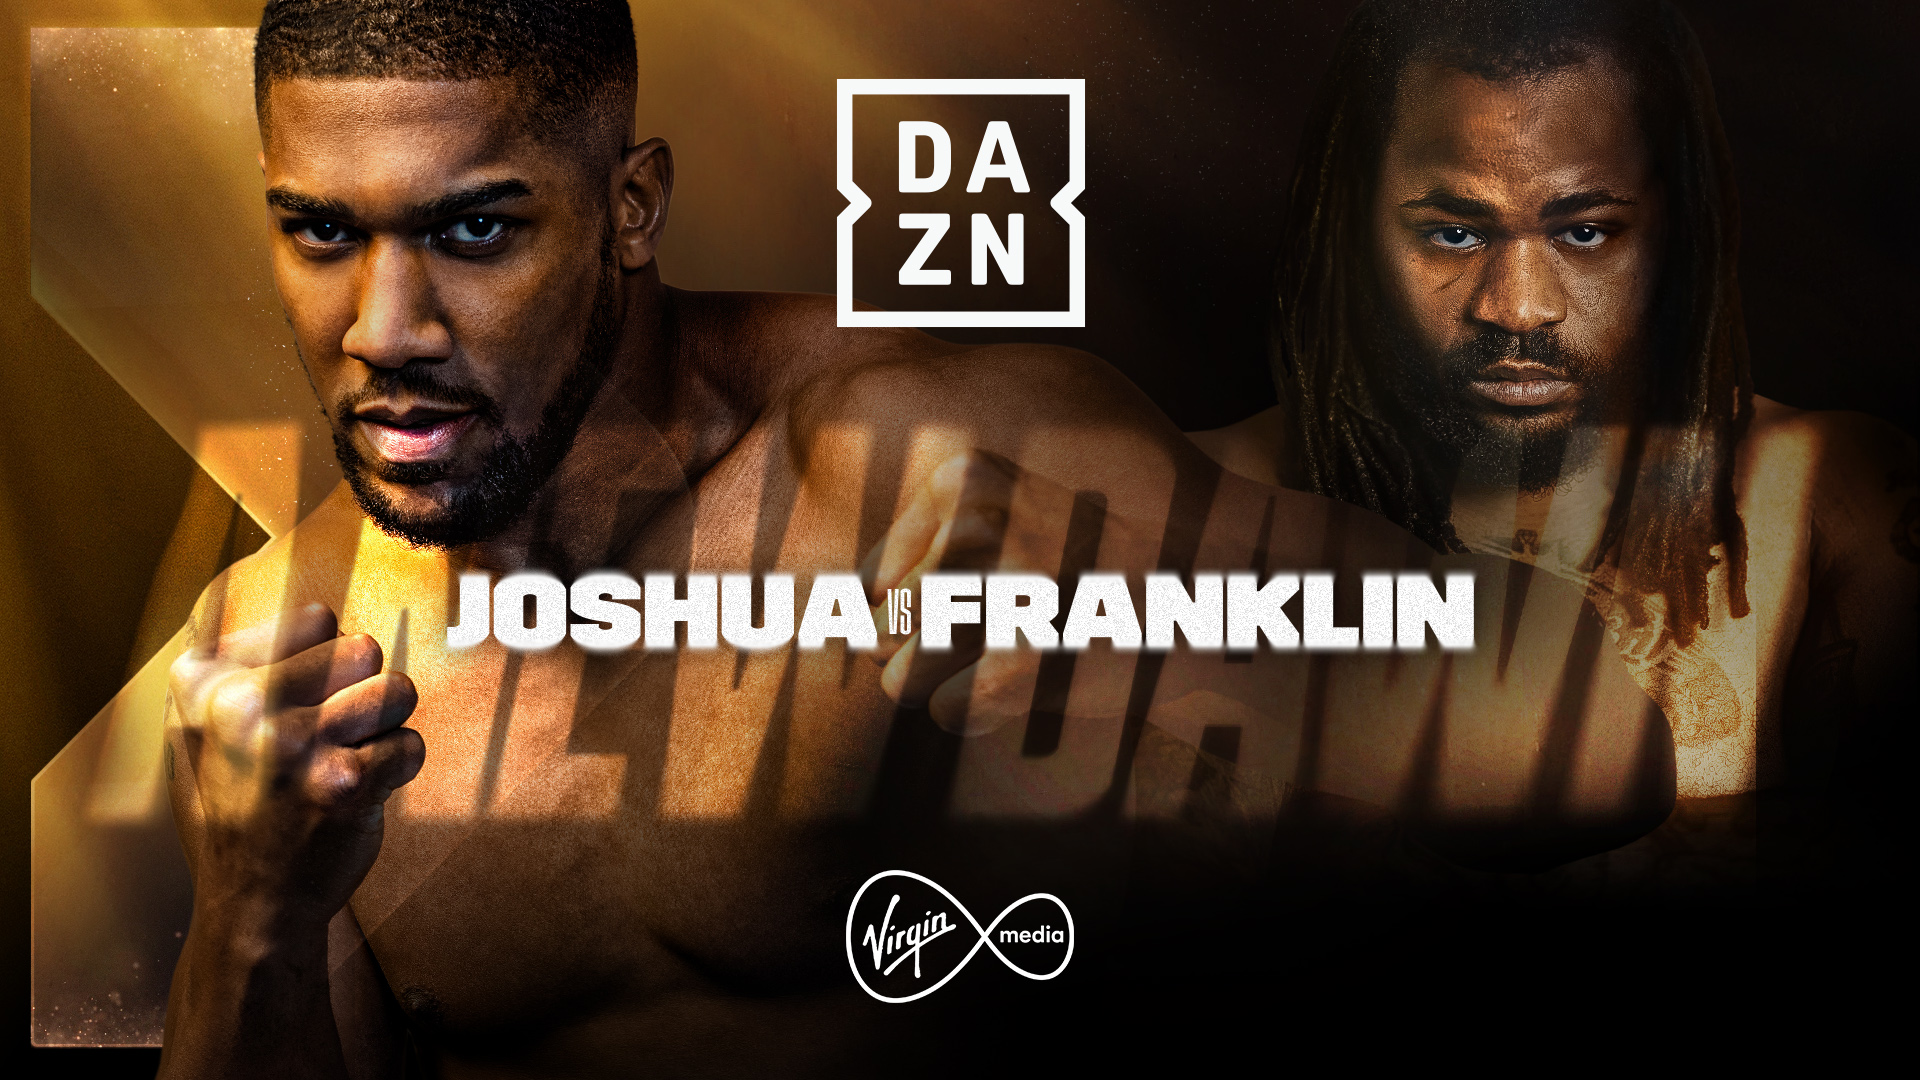 New DAZN and Virgin Media partnership kicks off with PPV access to Anthony Joshua fight